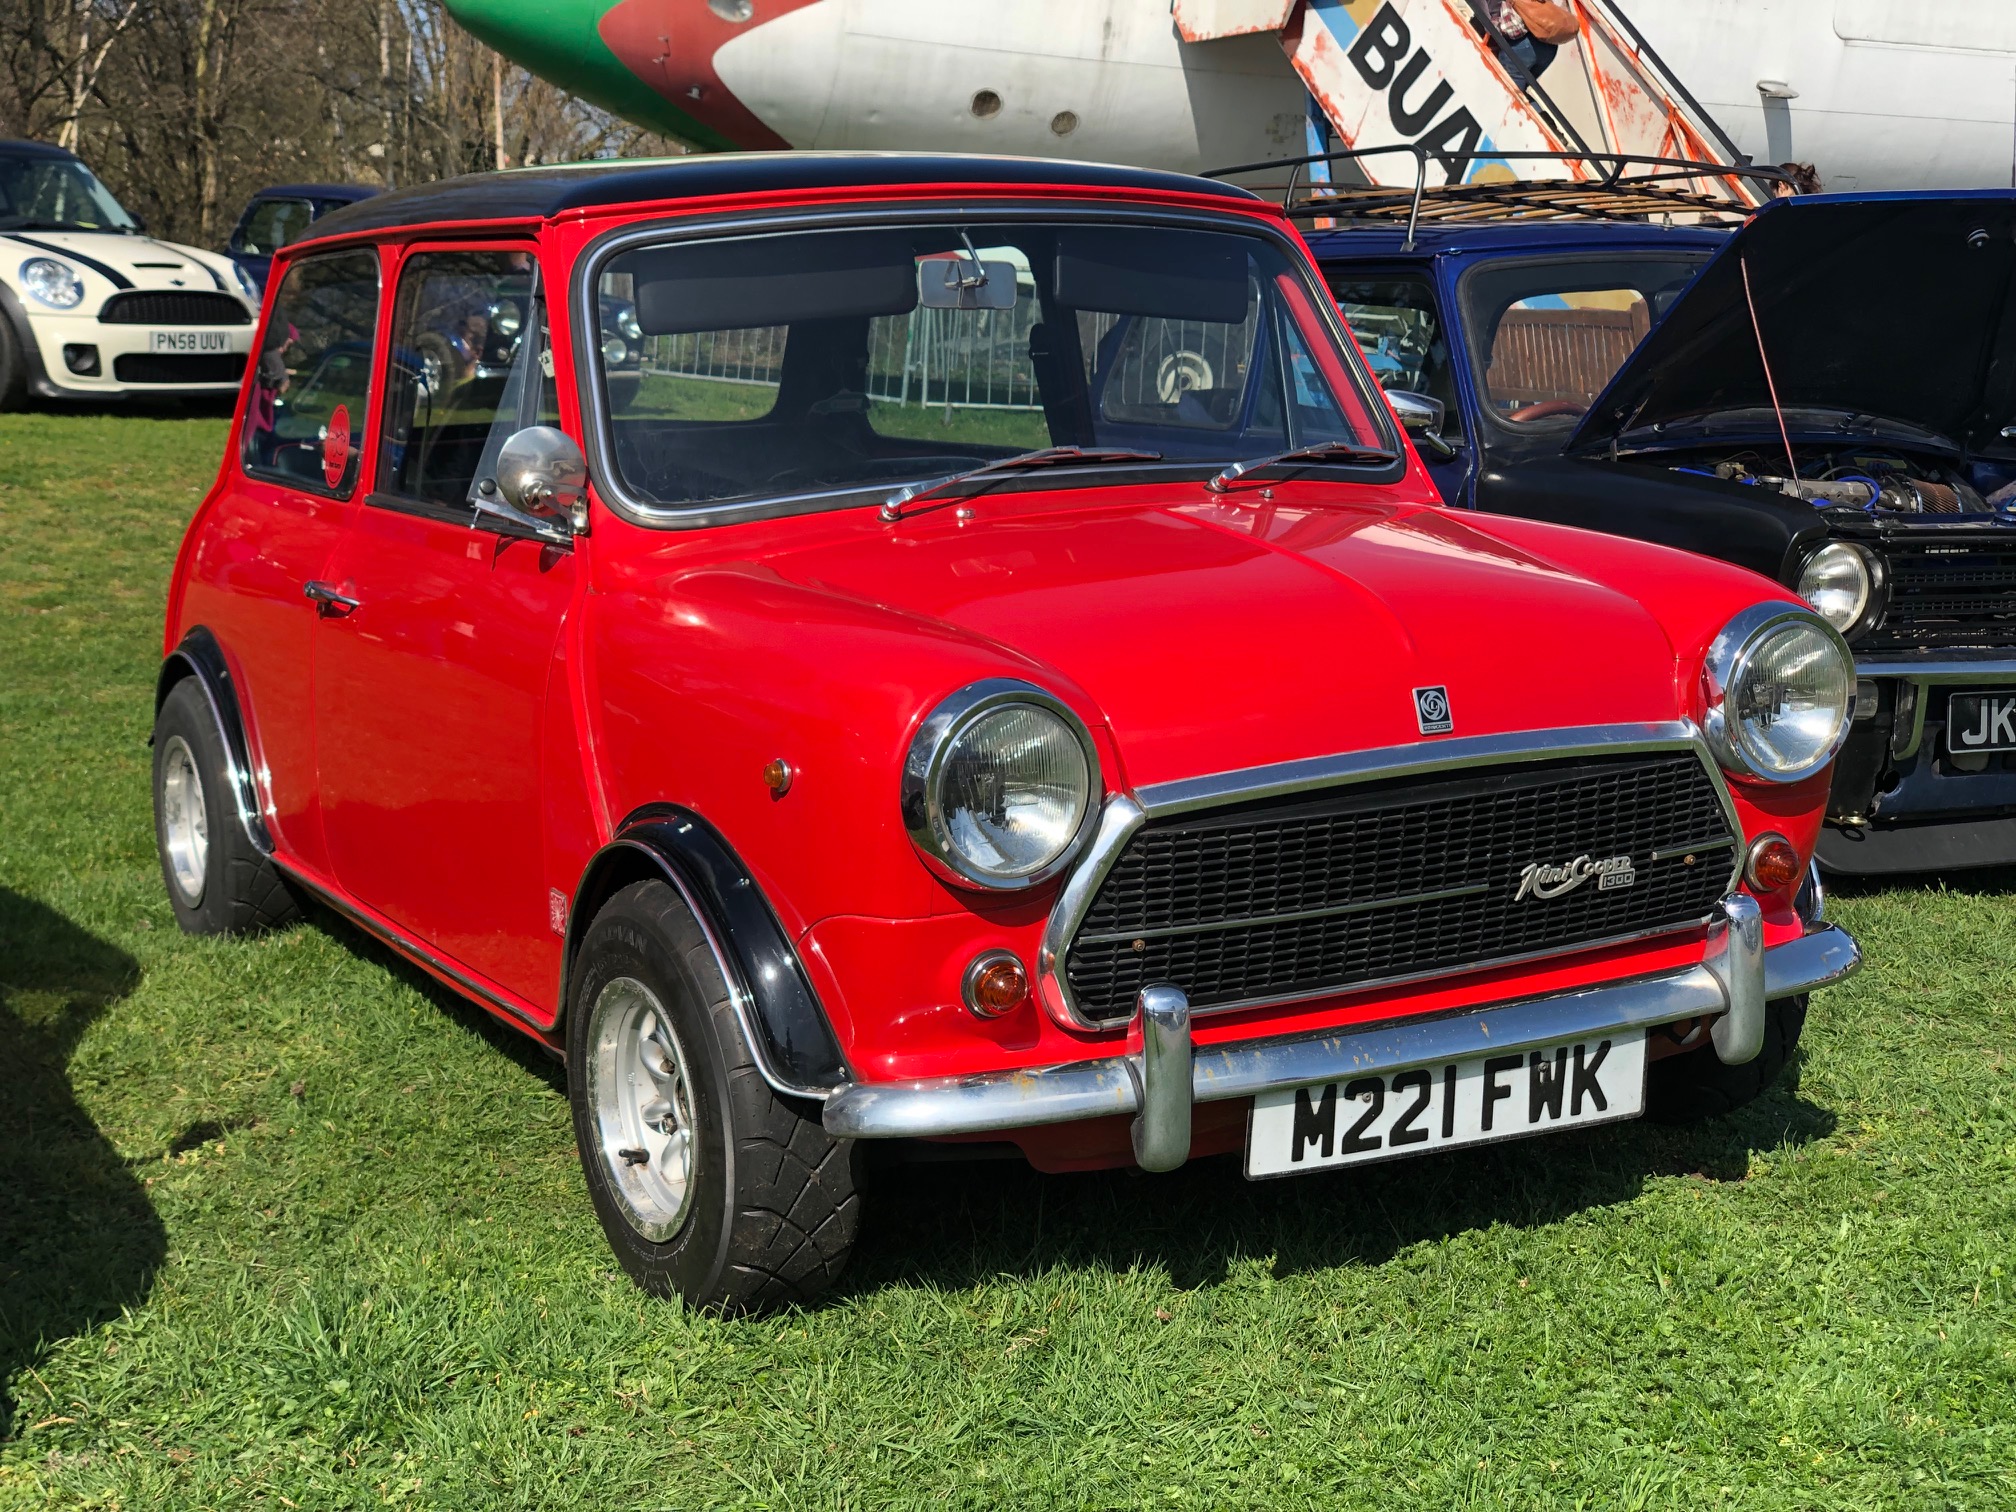 Travel Bites: a family day out at Brooklands Museum